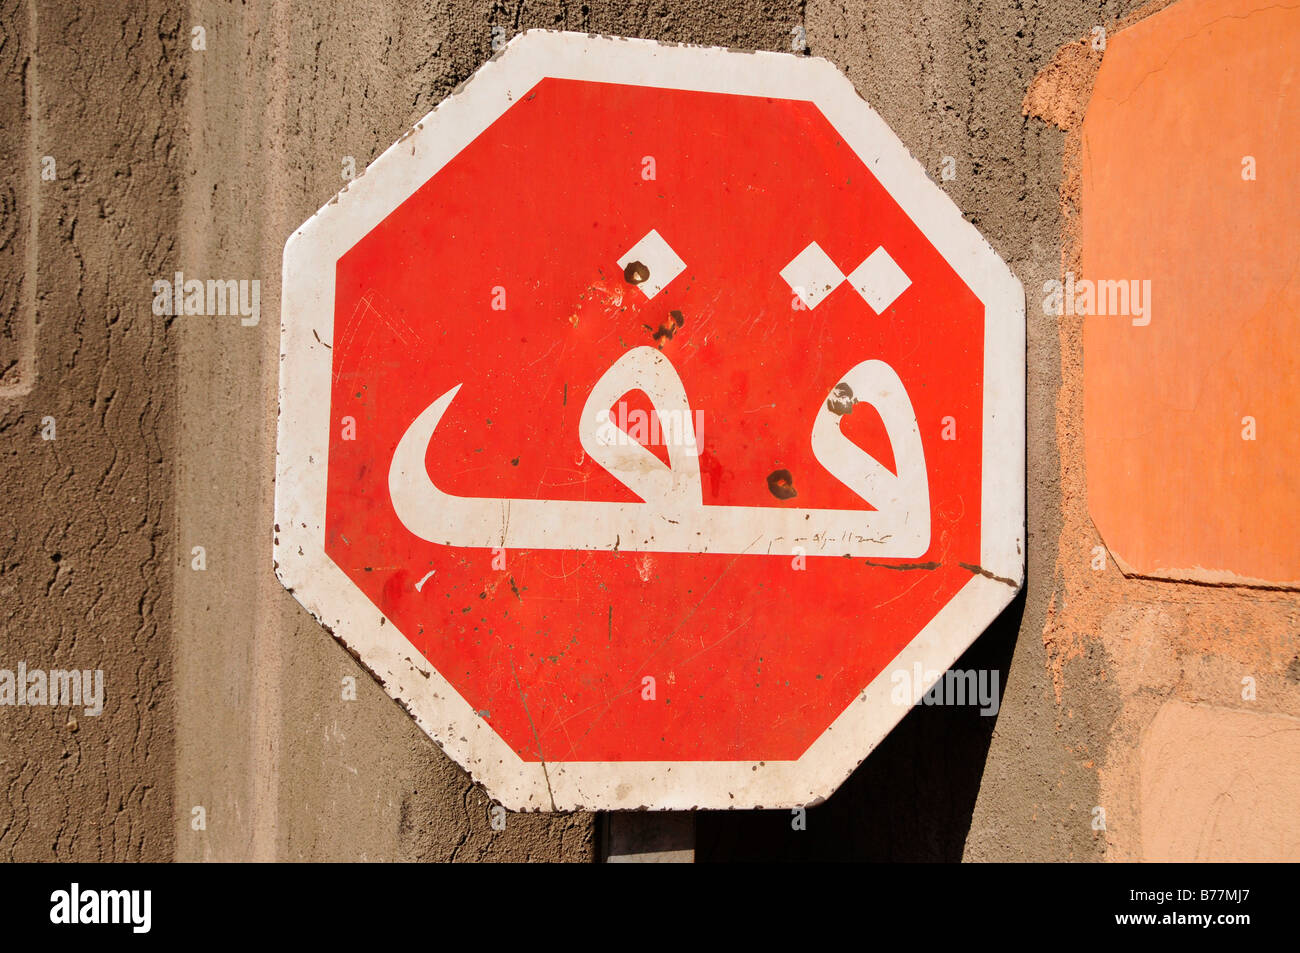 Stop sign in Arabic, Marrakech, Morocco, Africa Stock Photo